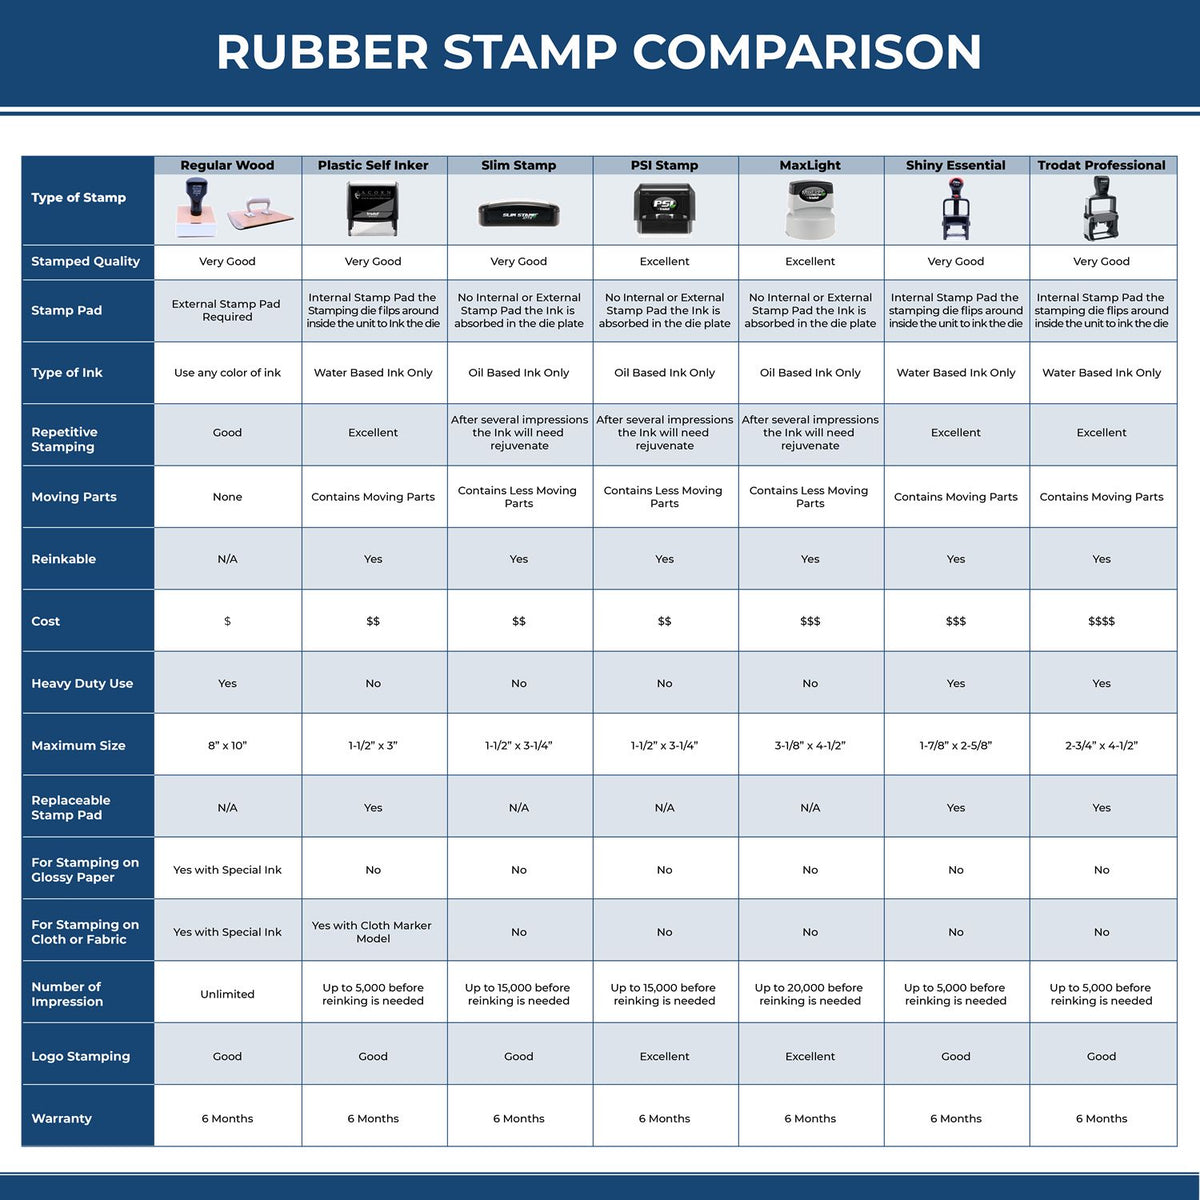 A comparison chart for the different types of mount models available for the MaxLight Premium Pre-Inked South Carolina State Seal Notarial Stamp.